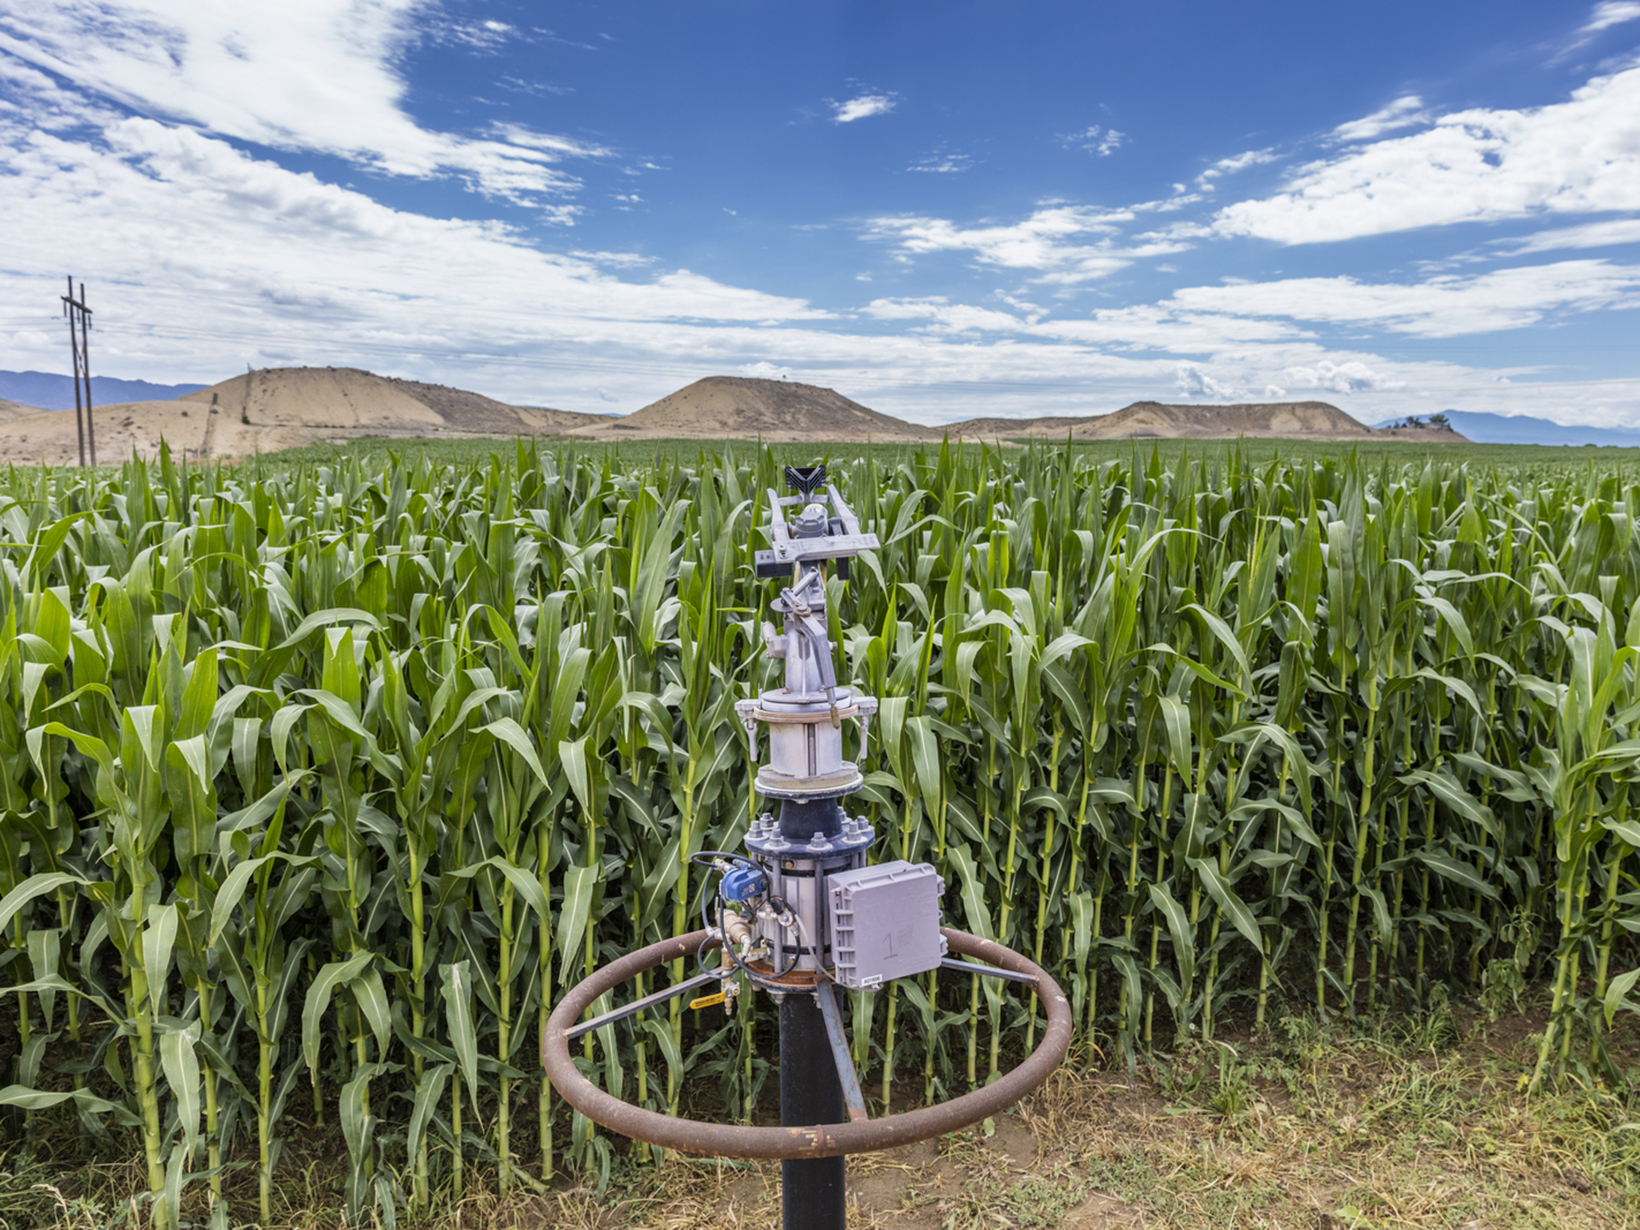 An irrigation device in front of a field of young corn on Meaker Farm in Colorado.